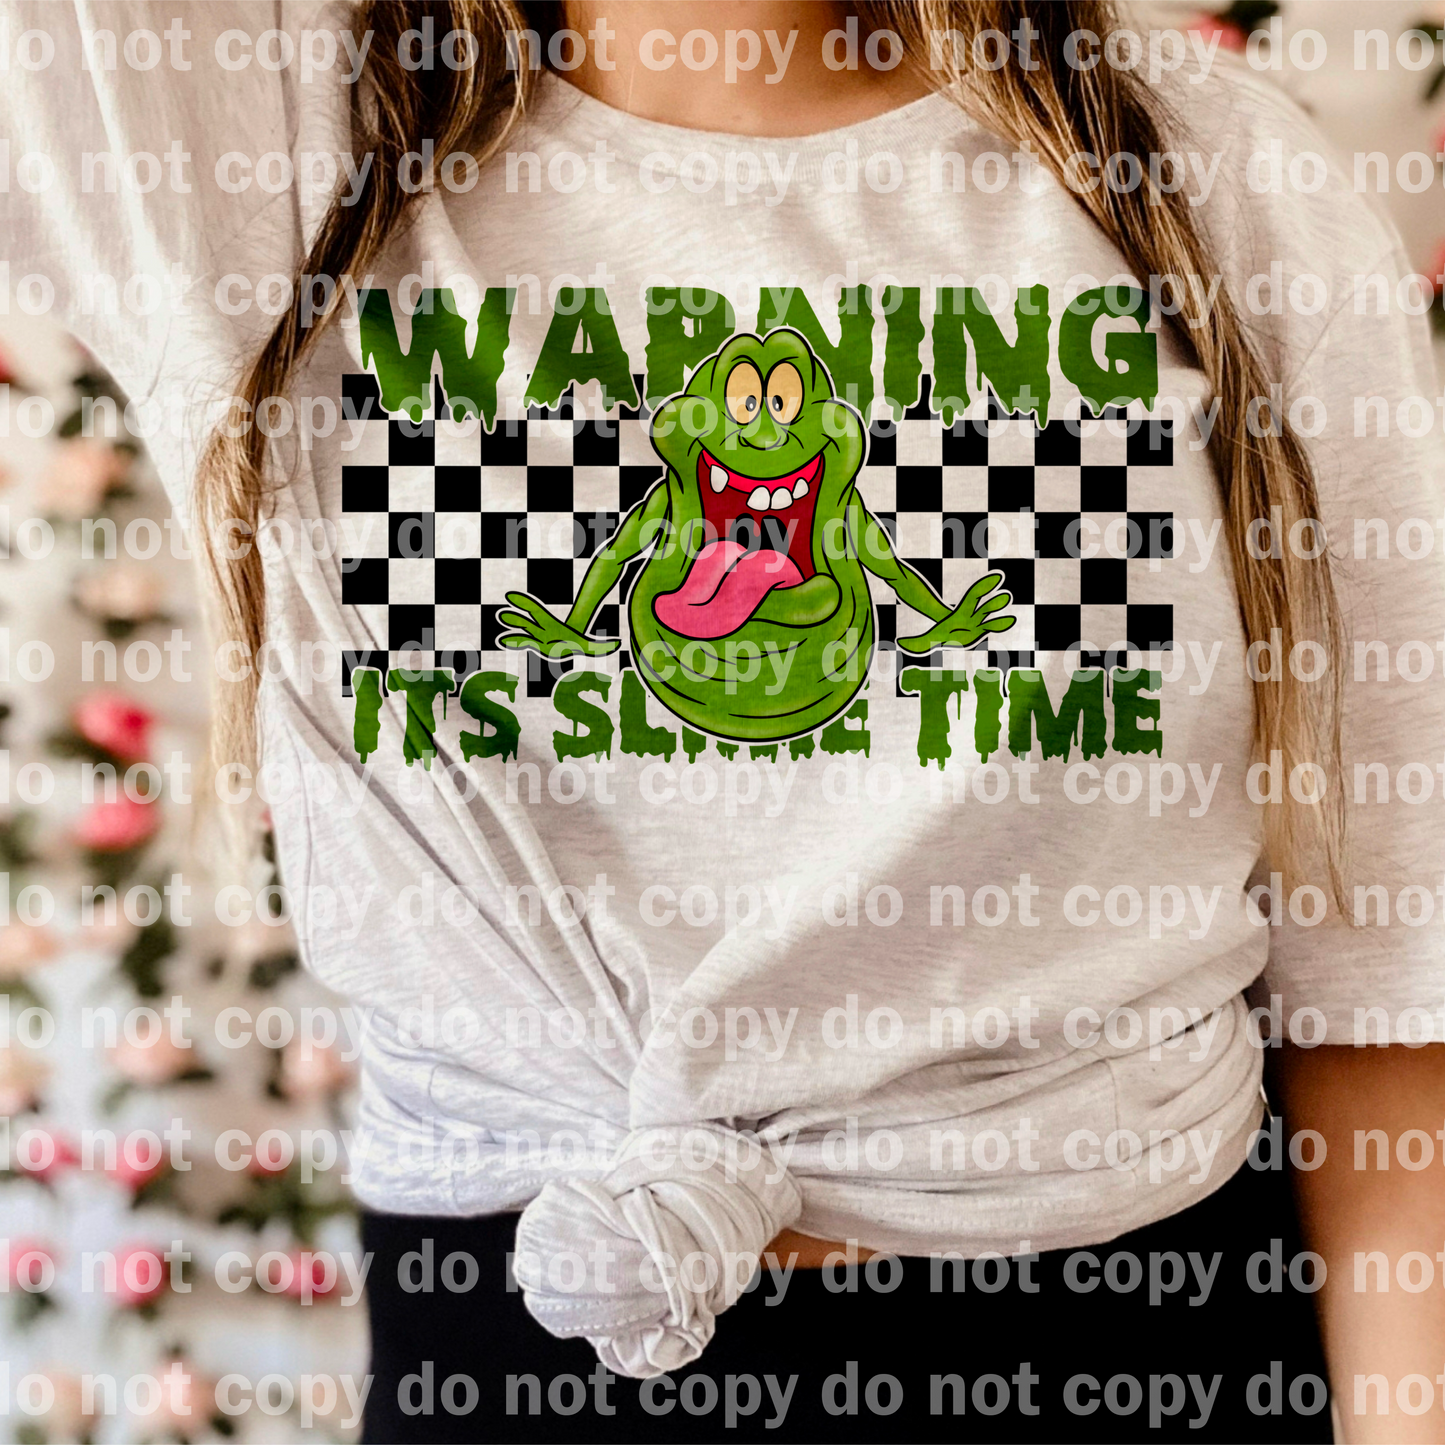 Warning It's Slime Time Full Color/One Color Dream Print or Sublimation Print